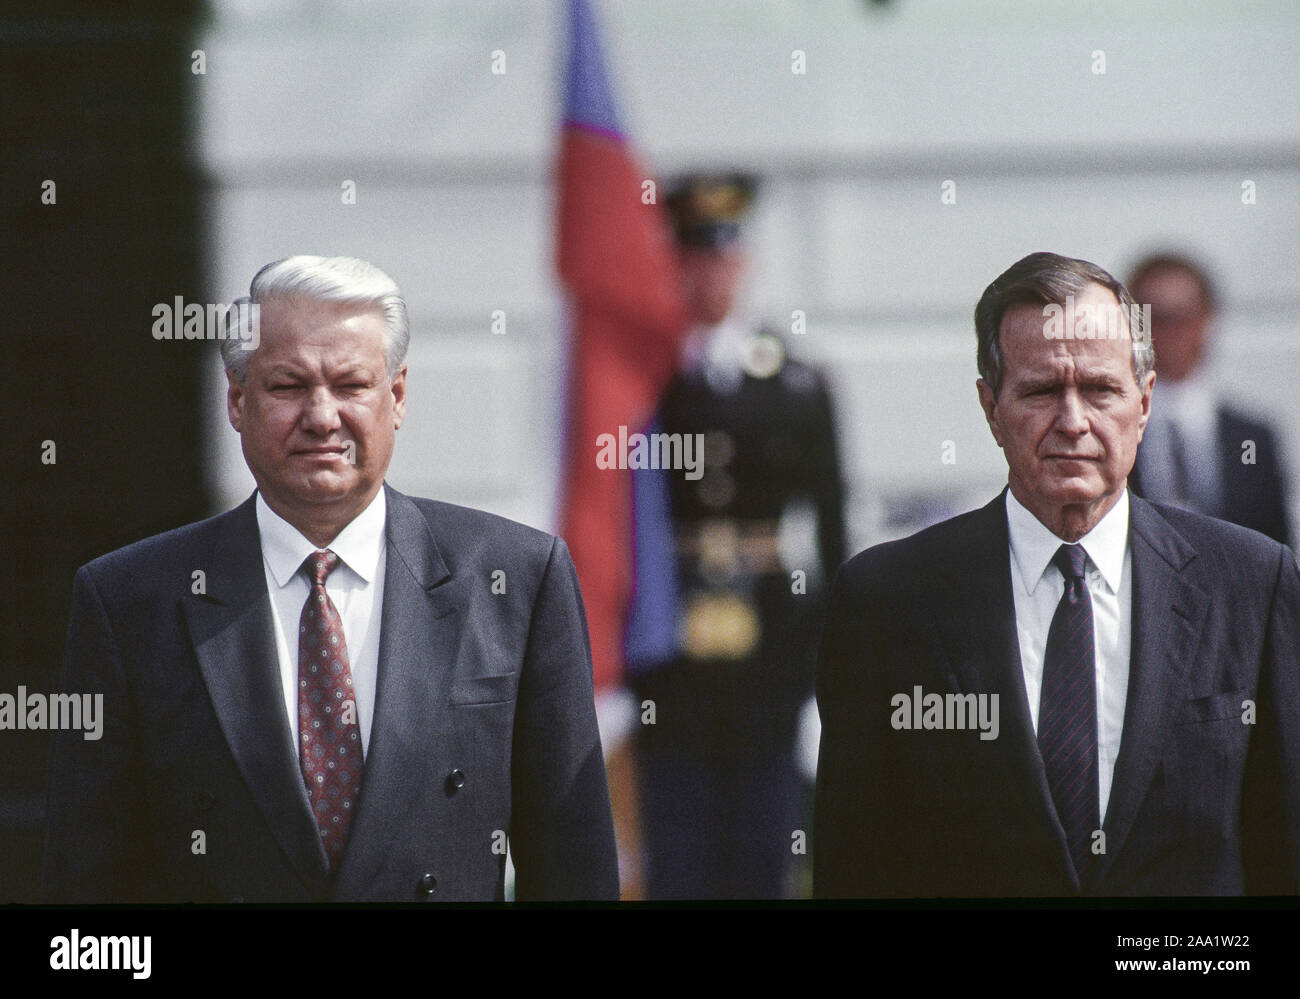 Washington DC, USA, June 16, 1992United States President George H.W. Bush with Russian President Boris Yeltsin during official state visit to the White House. Credit: Mark Reinstein / MediaPunch Stock Photo